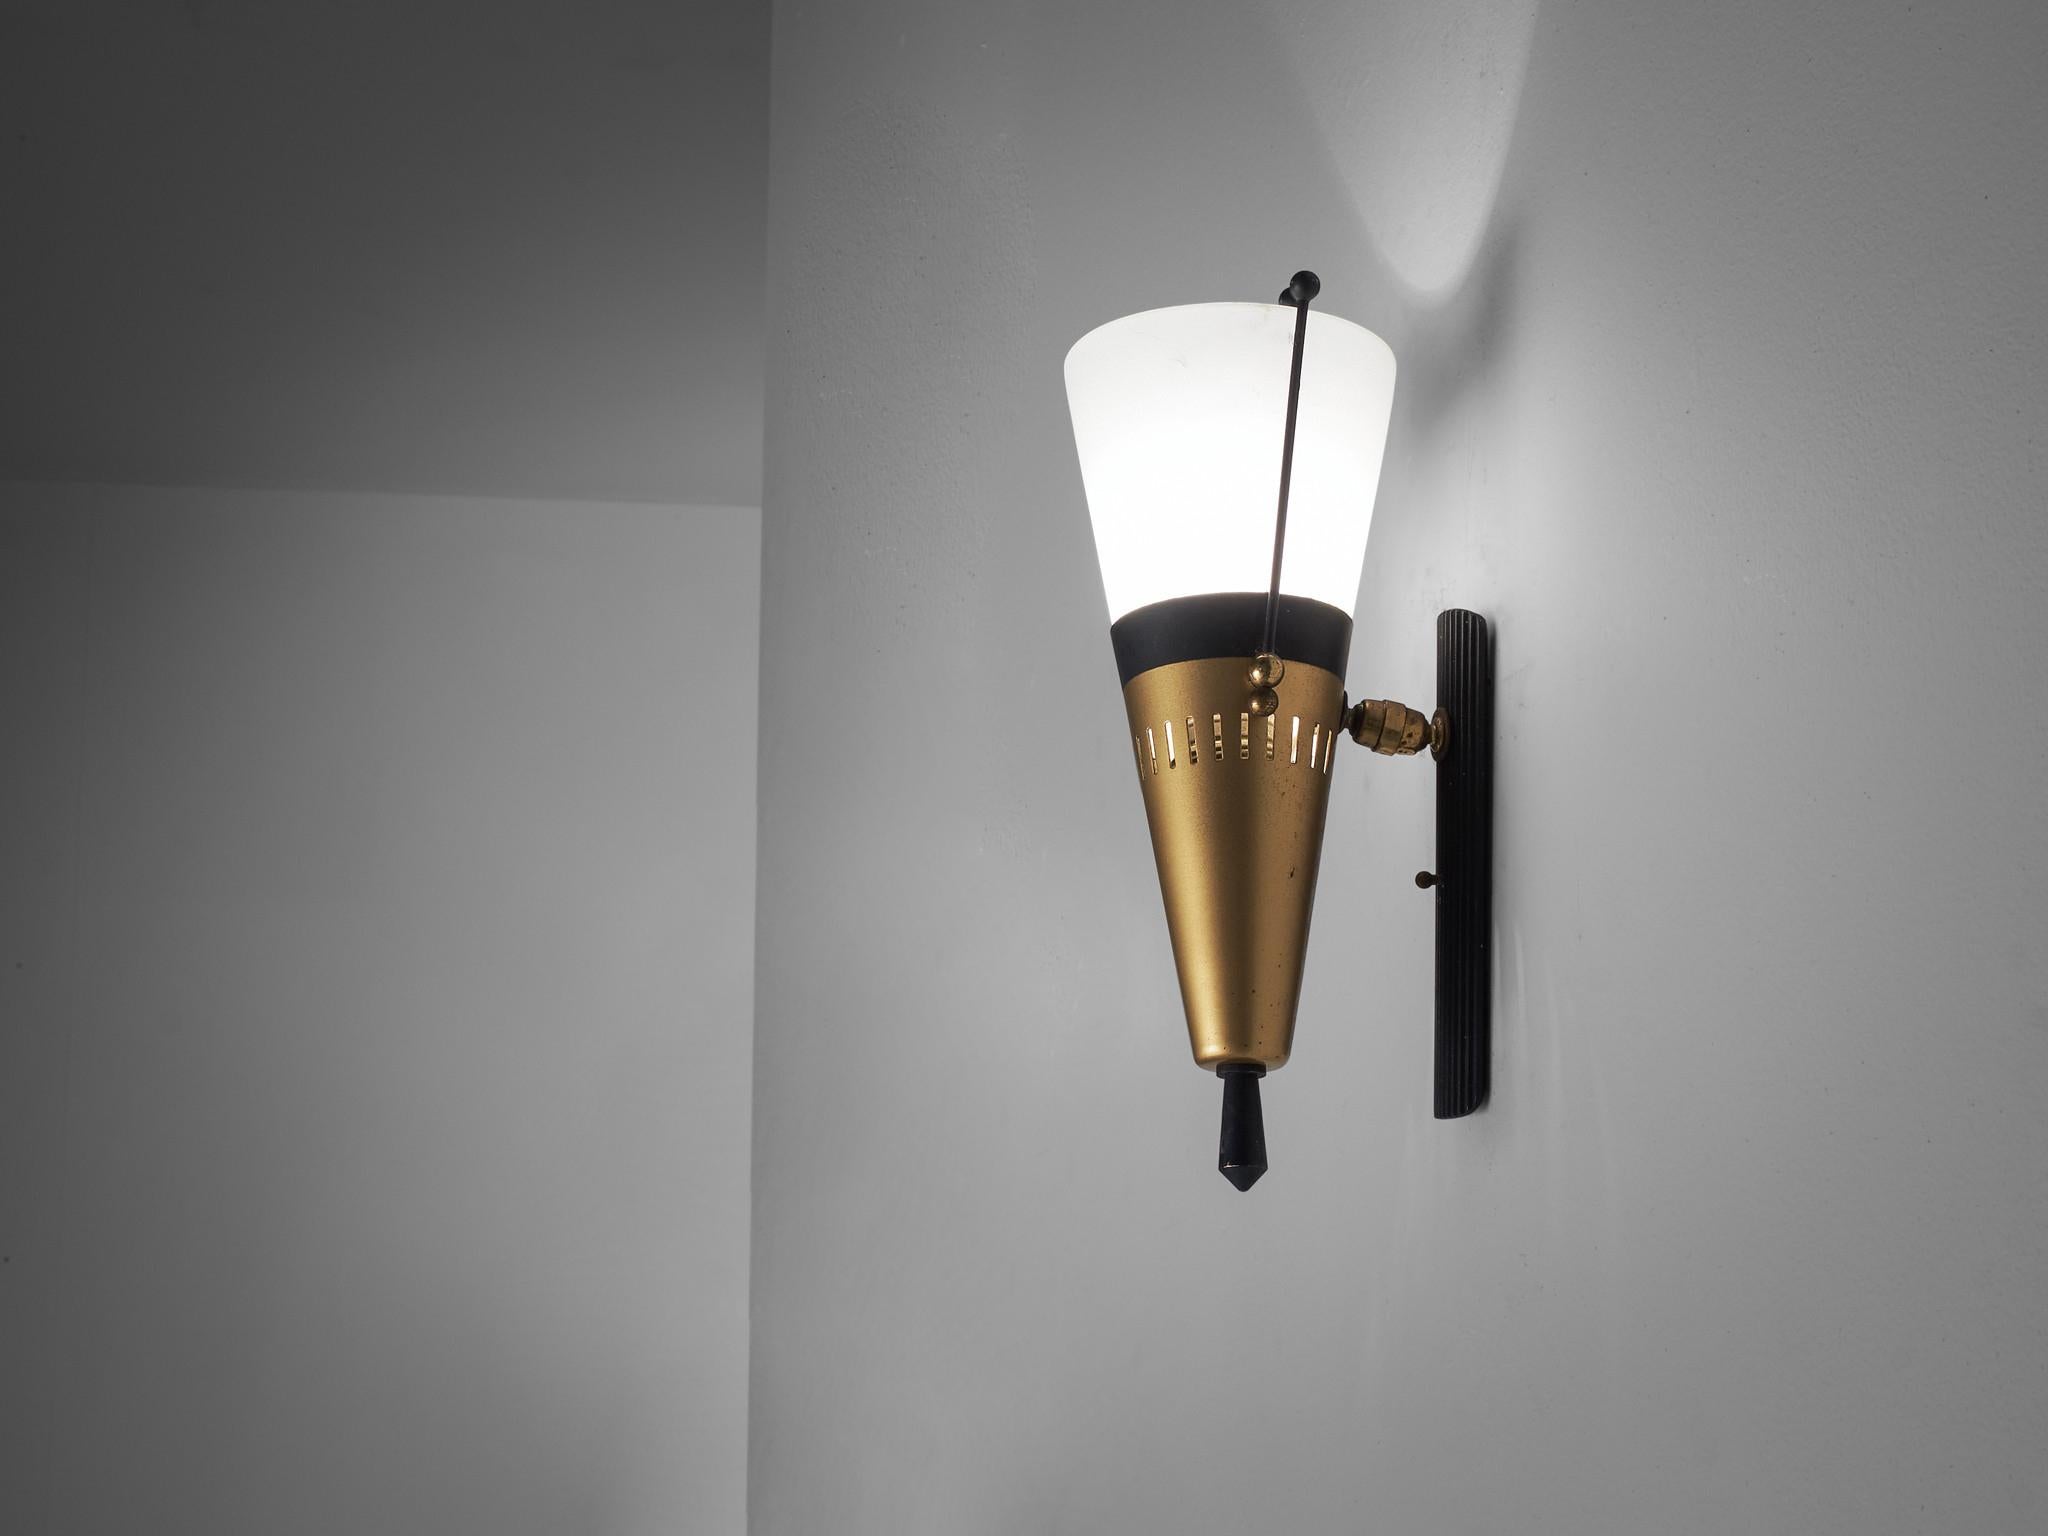 Wall light, brass, glass, coated aluminum, Italy, 1950s

This elegant light from Italy features a cone shape with a perforated brass socket that holds the glass shade. It has a very spherical and soft light partition due to the white opaque glass